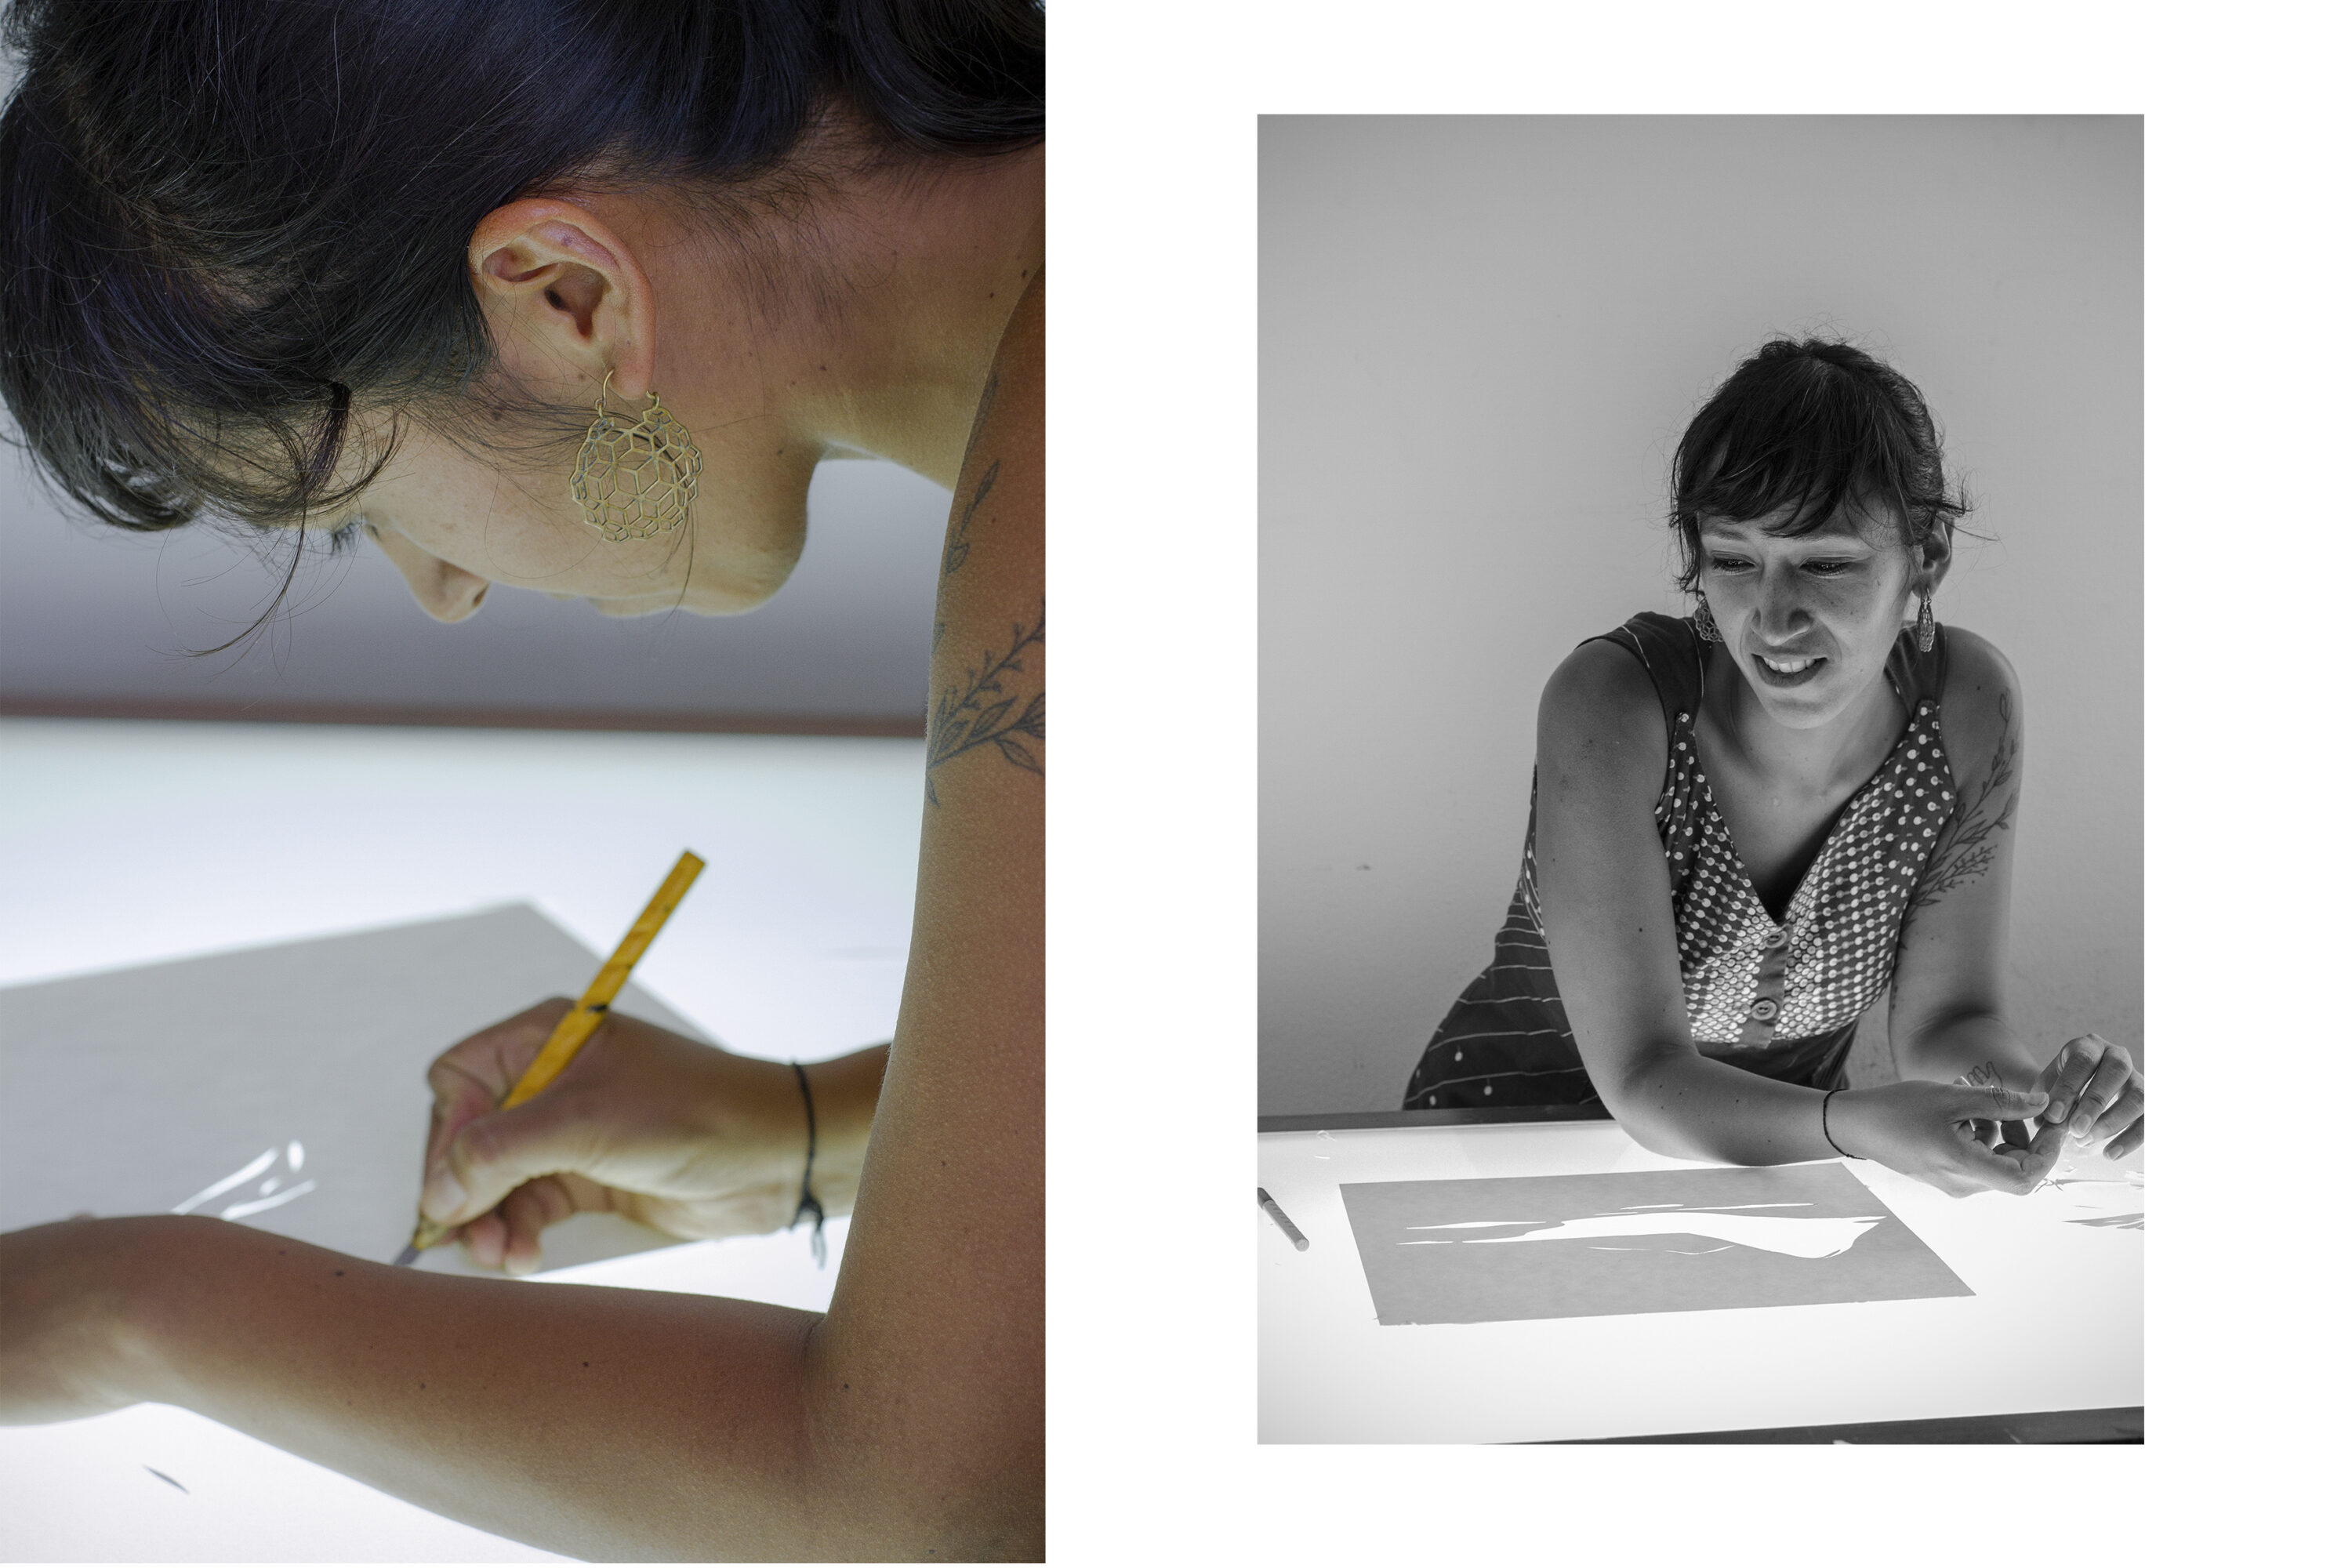 Two photographs. The left is a closeup of an artist cutting white paper with an exacto knife; the right is a black and white portrait of the same artist leaning over the table that holds the paper and knife, smiling down at the work.